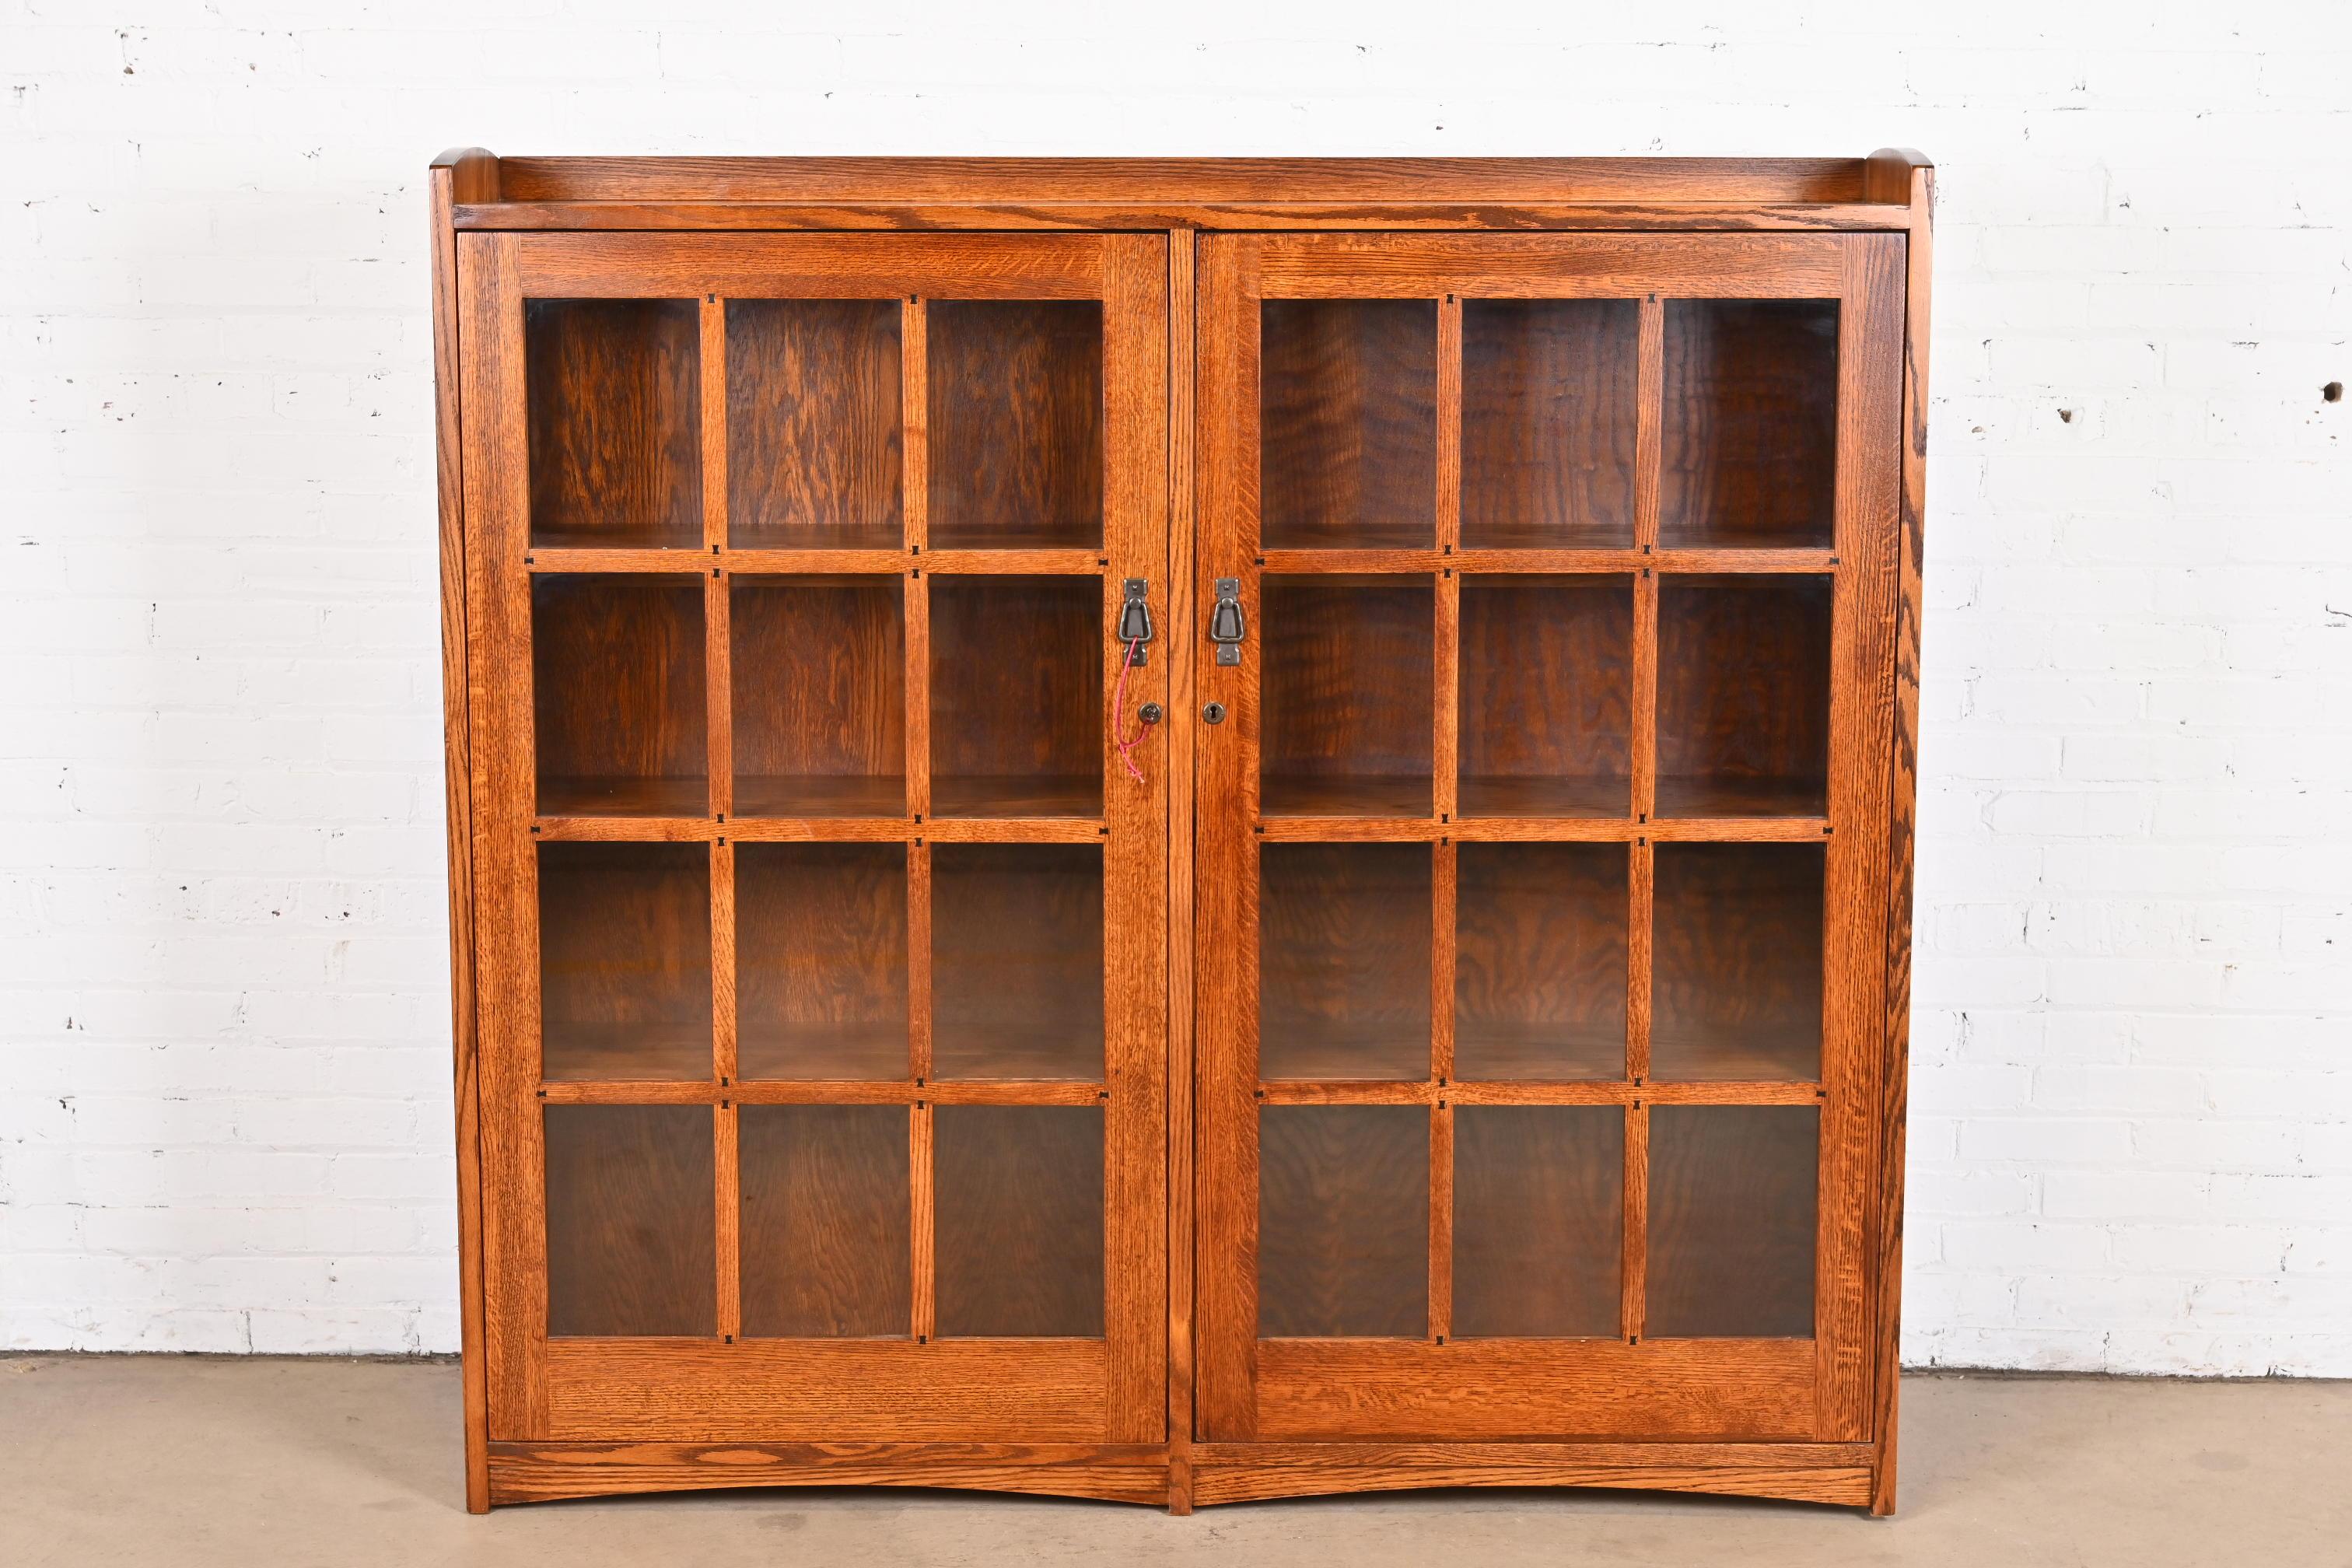 A beautiful Mission oak Arts & Crafts bookcase cabinet

In the manner of Stickley

USA, Late 20th Century

Solid oak, with mullioned glass front doors, and original hardware. Cabinets lock, and key is included.

Measures: 63.25